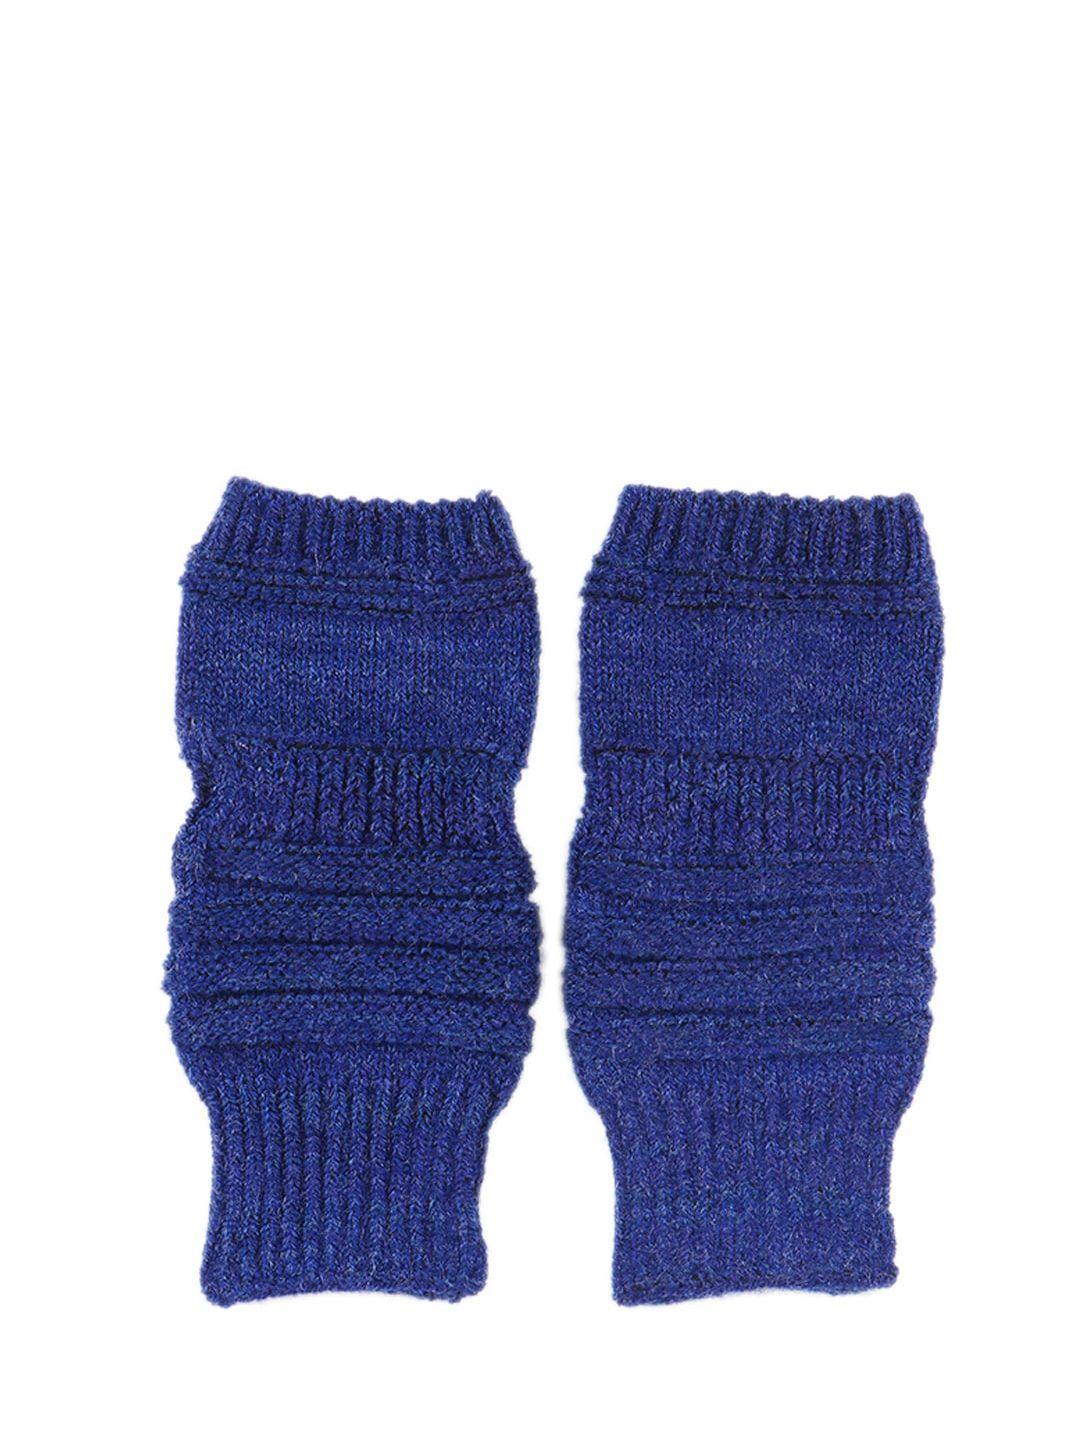 bharatasya kids blue solid acrylic woven knitted gloves